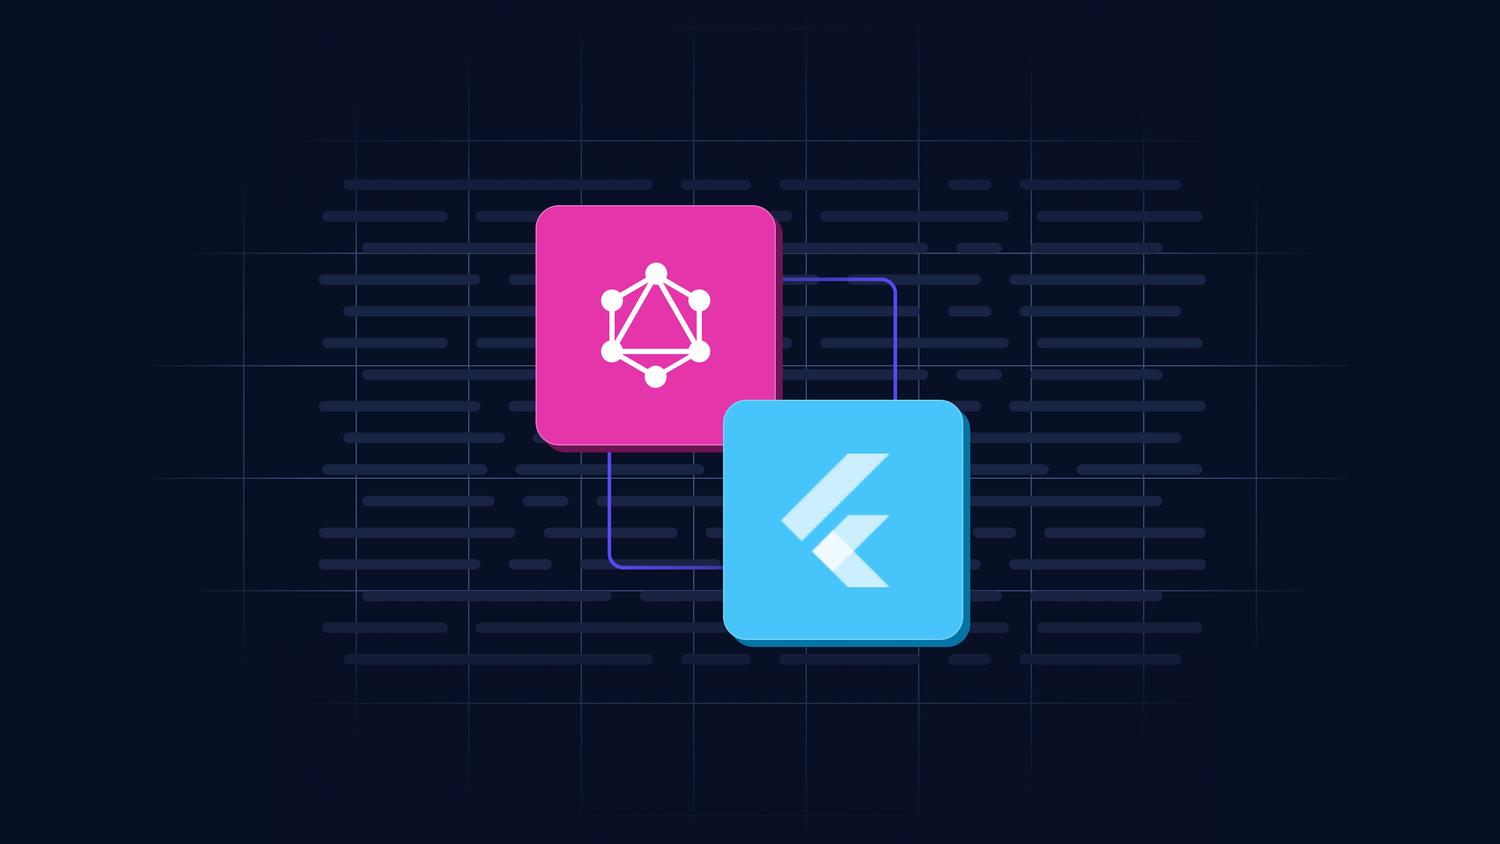 Guided tutorial on how to use GraphQL with Flutter